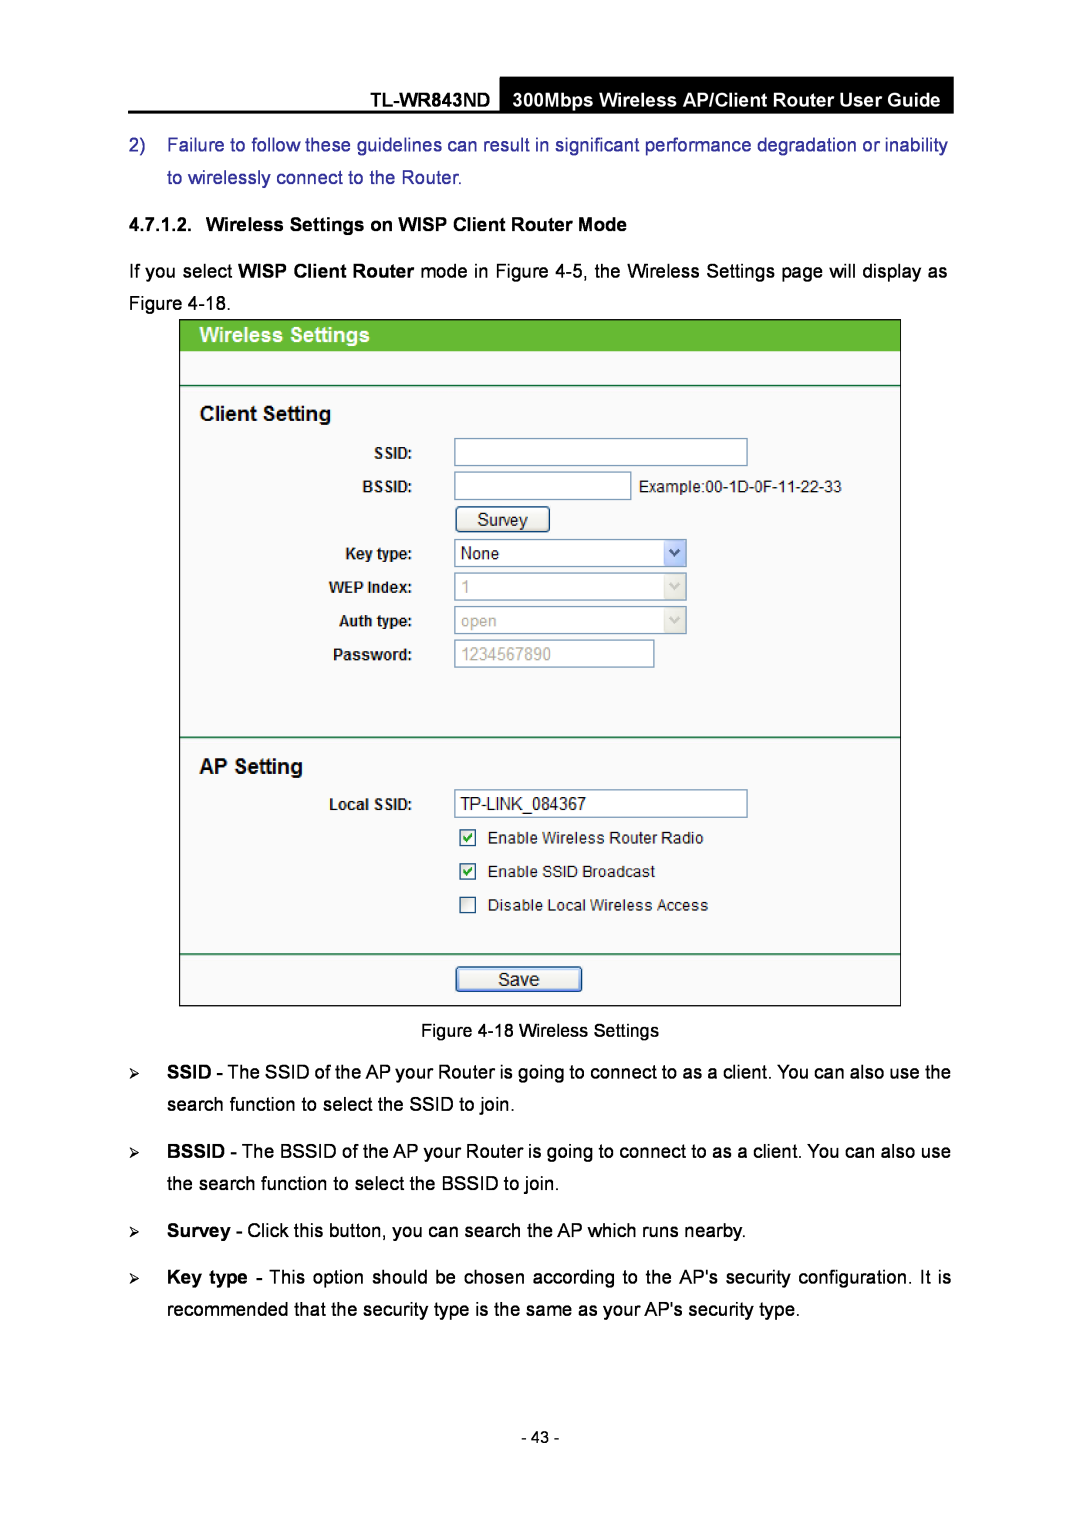 TP-Link manual Wireless Settings on WISP Client Router Mode, TL-WR843ND 300Mbps Wireless AP/Client Router User Guide 